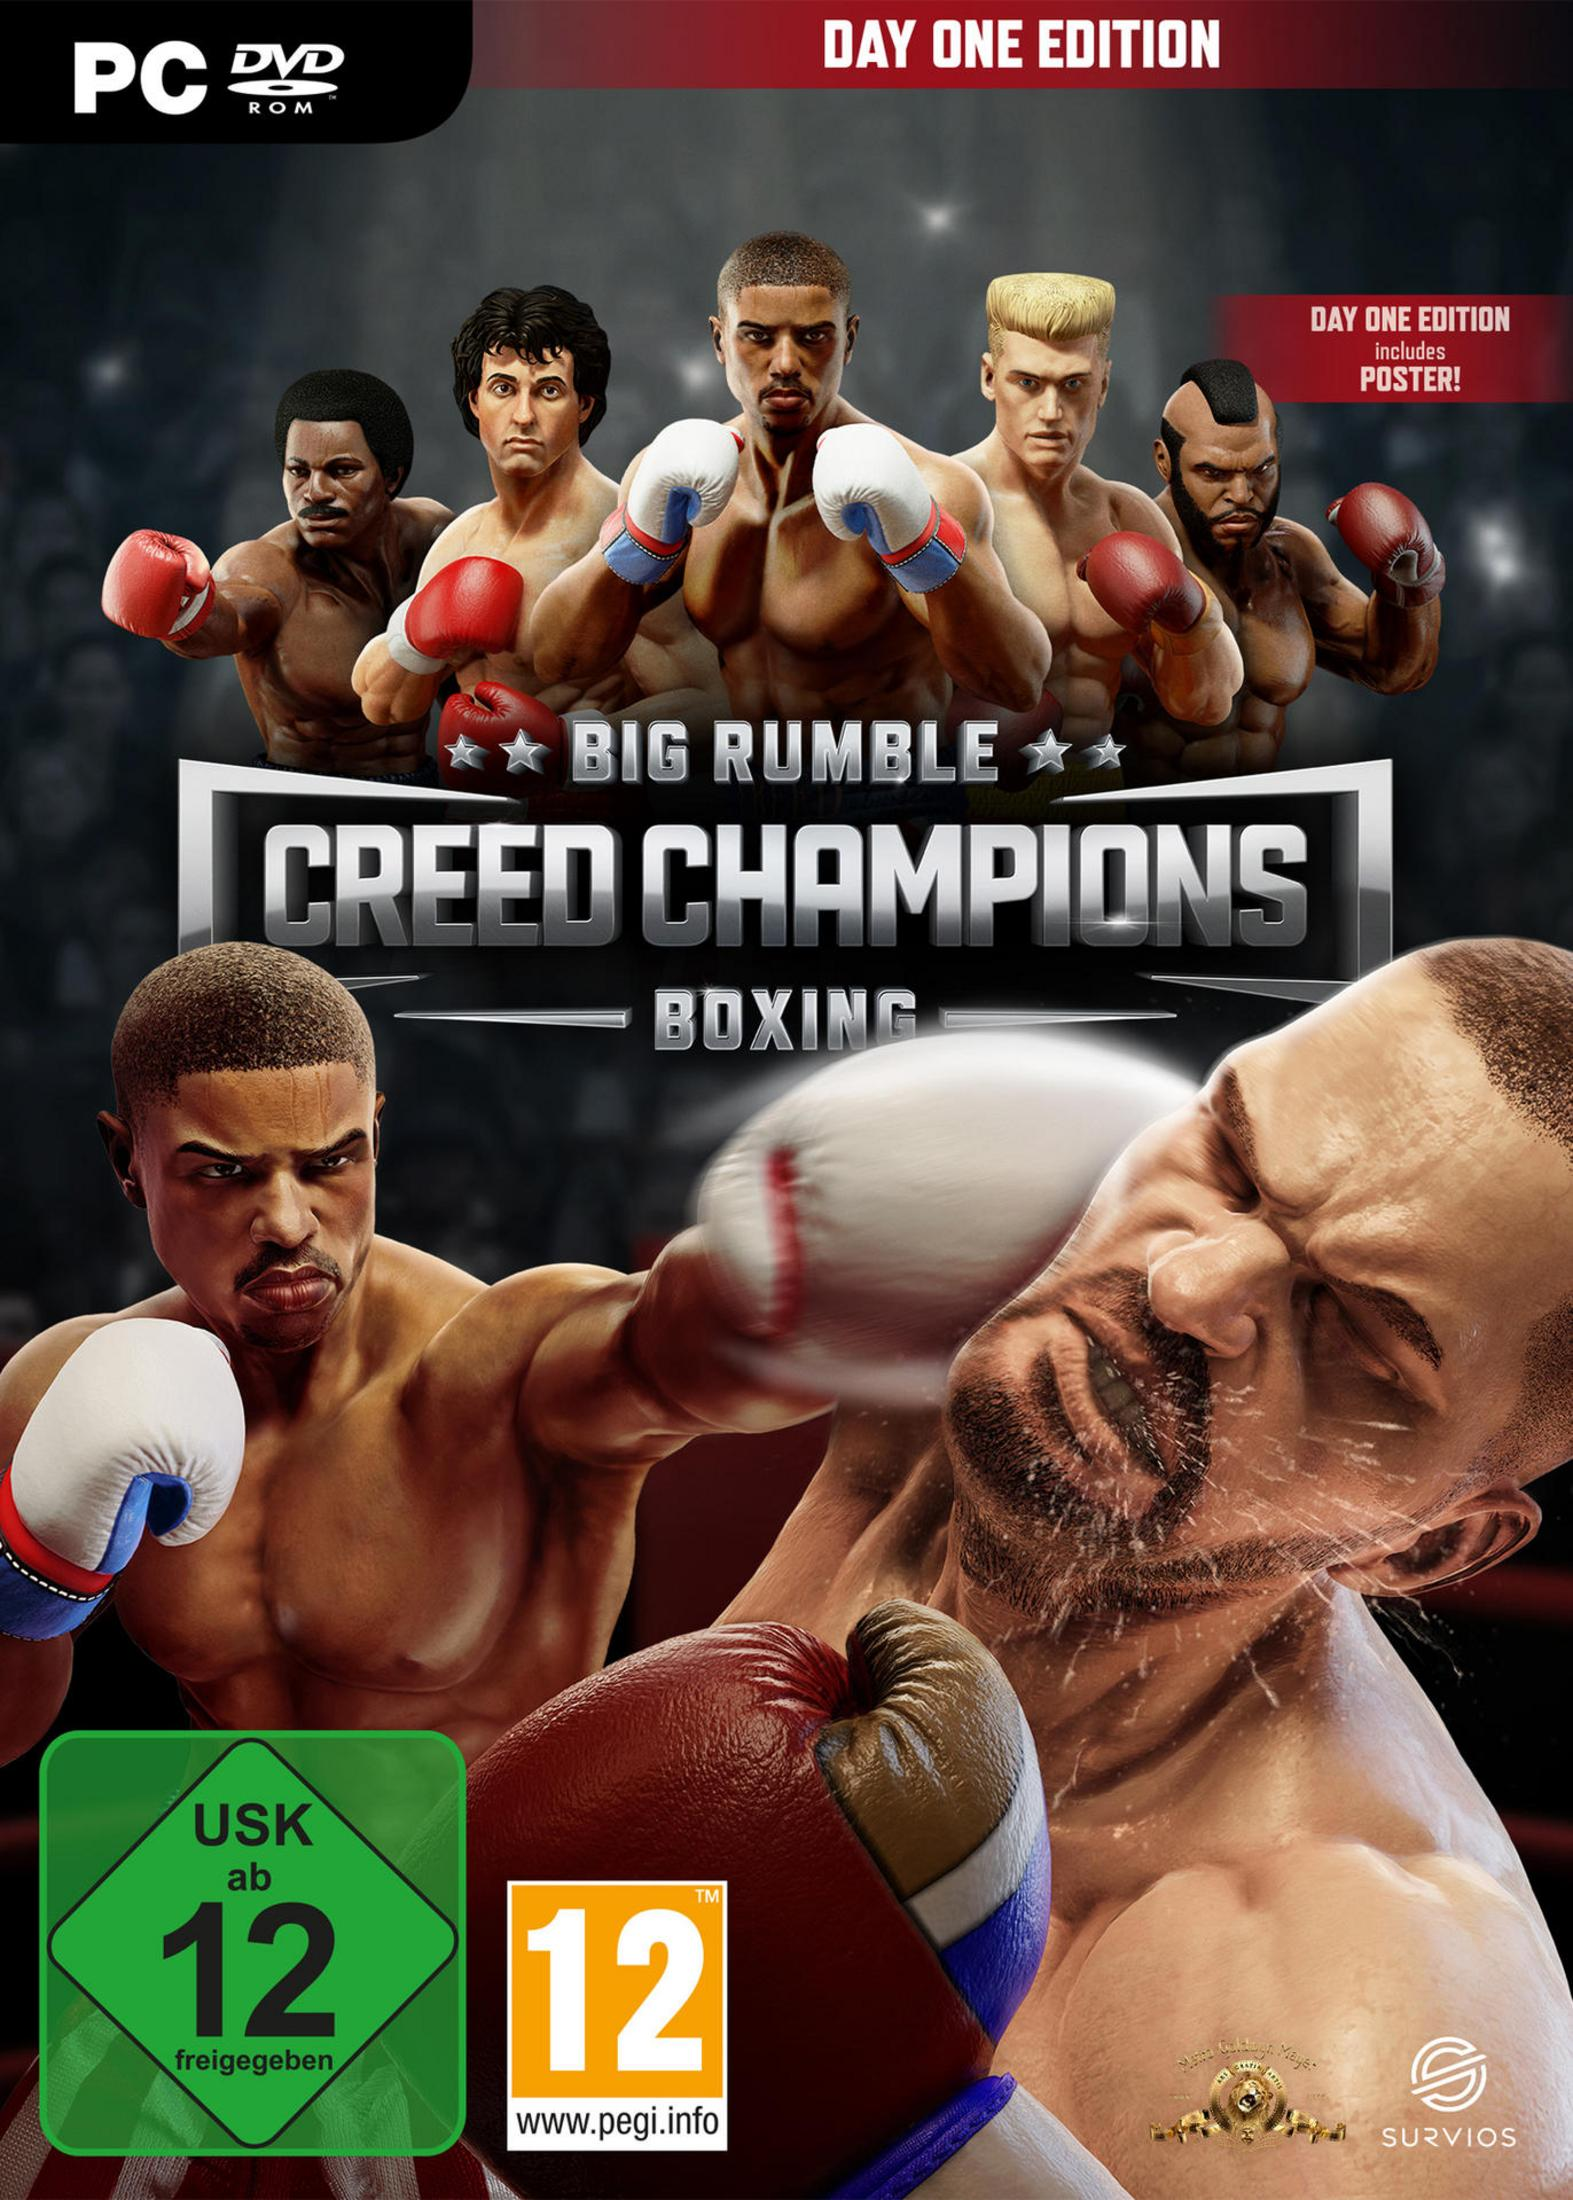 BIG RUMBLE ED. - BOXING-CREED ONE [PC] CHAMPIONSDAY